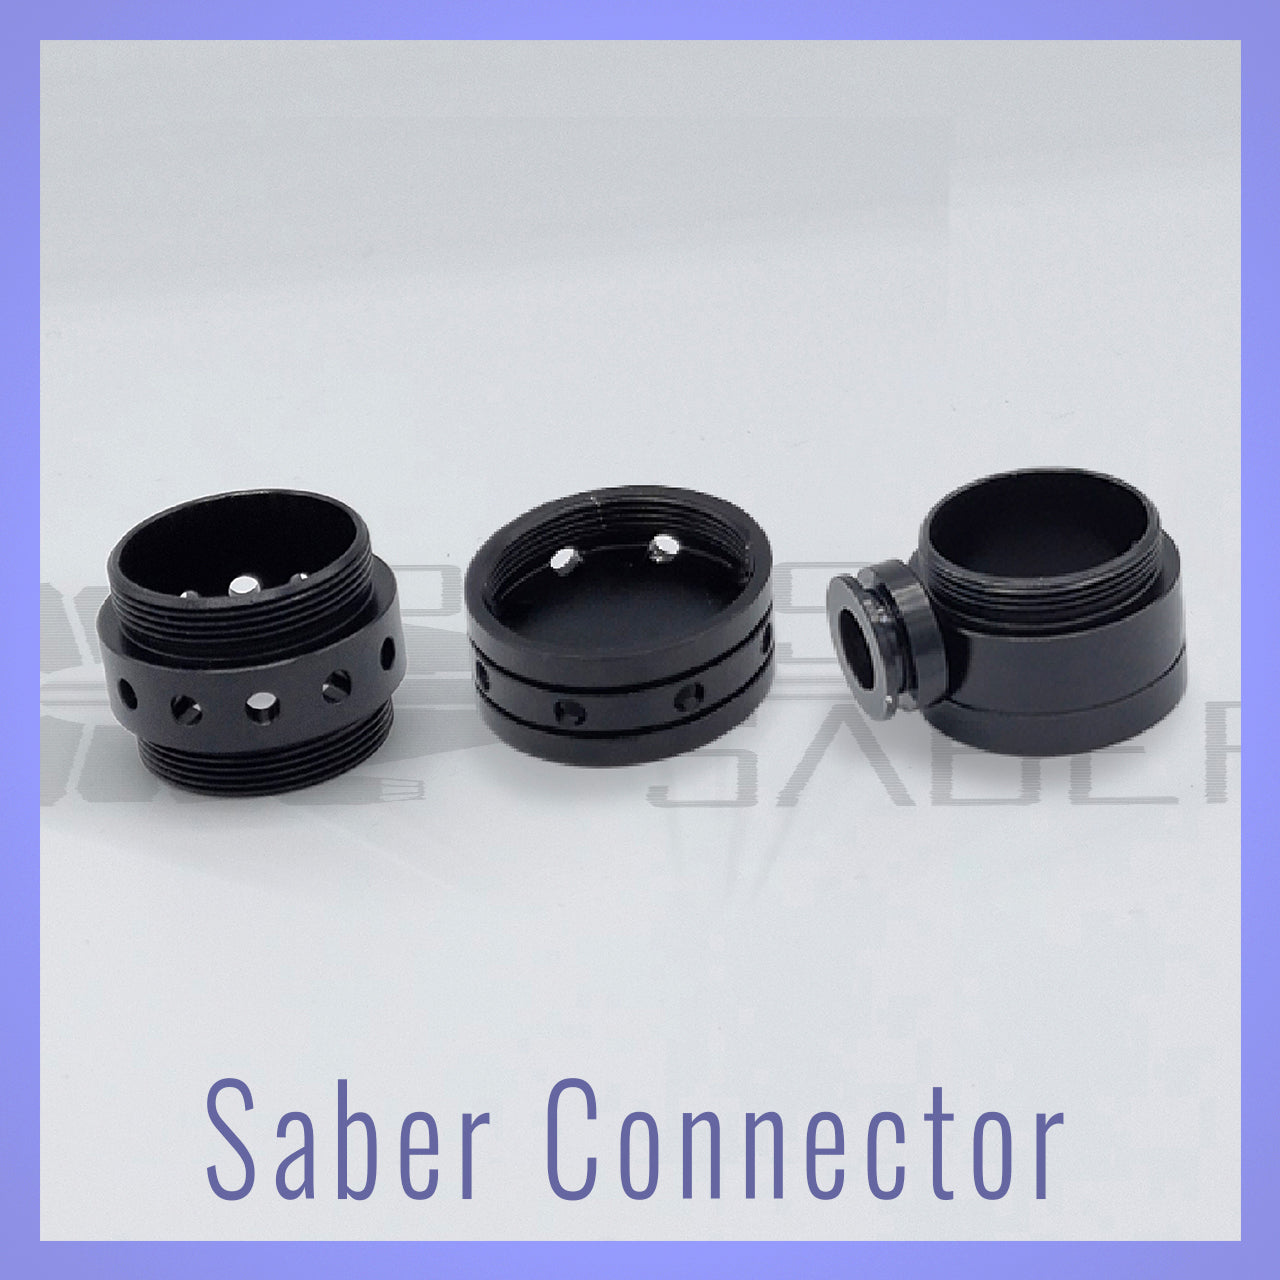 Saber Connector - Parsec Saber Accessory & Add-on